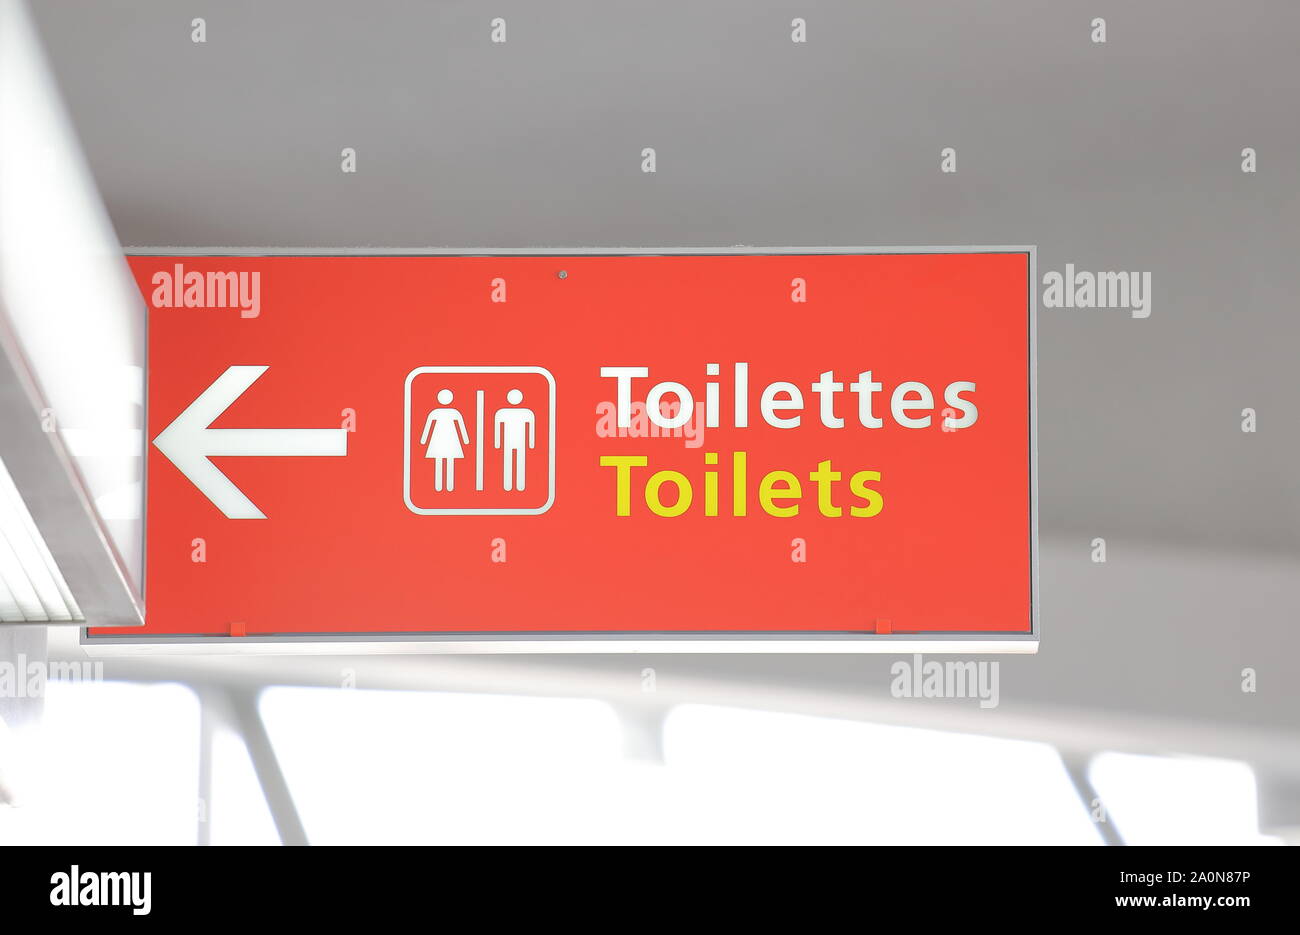 Public toilet sign Paris France. Translation for French - Toilets. Stock Photo